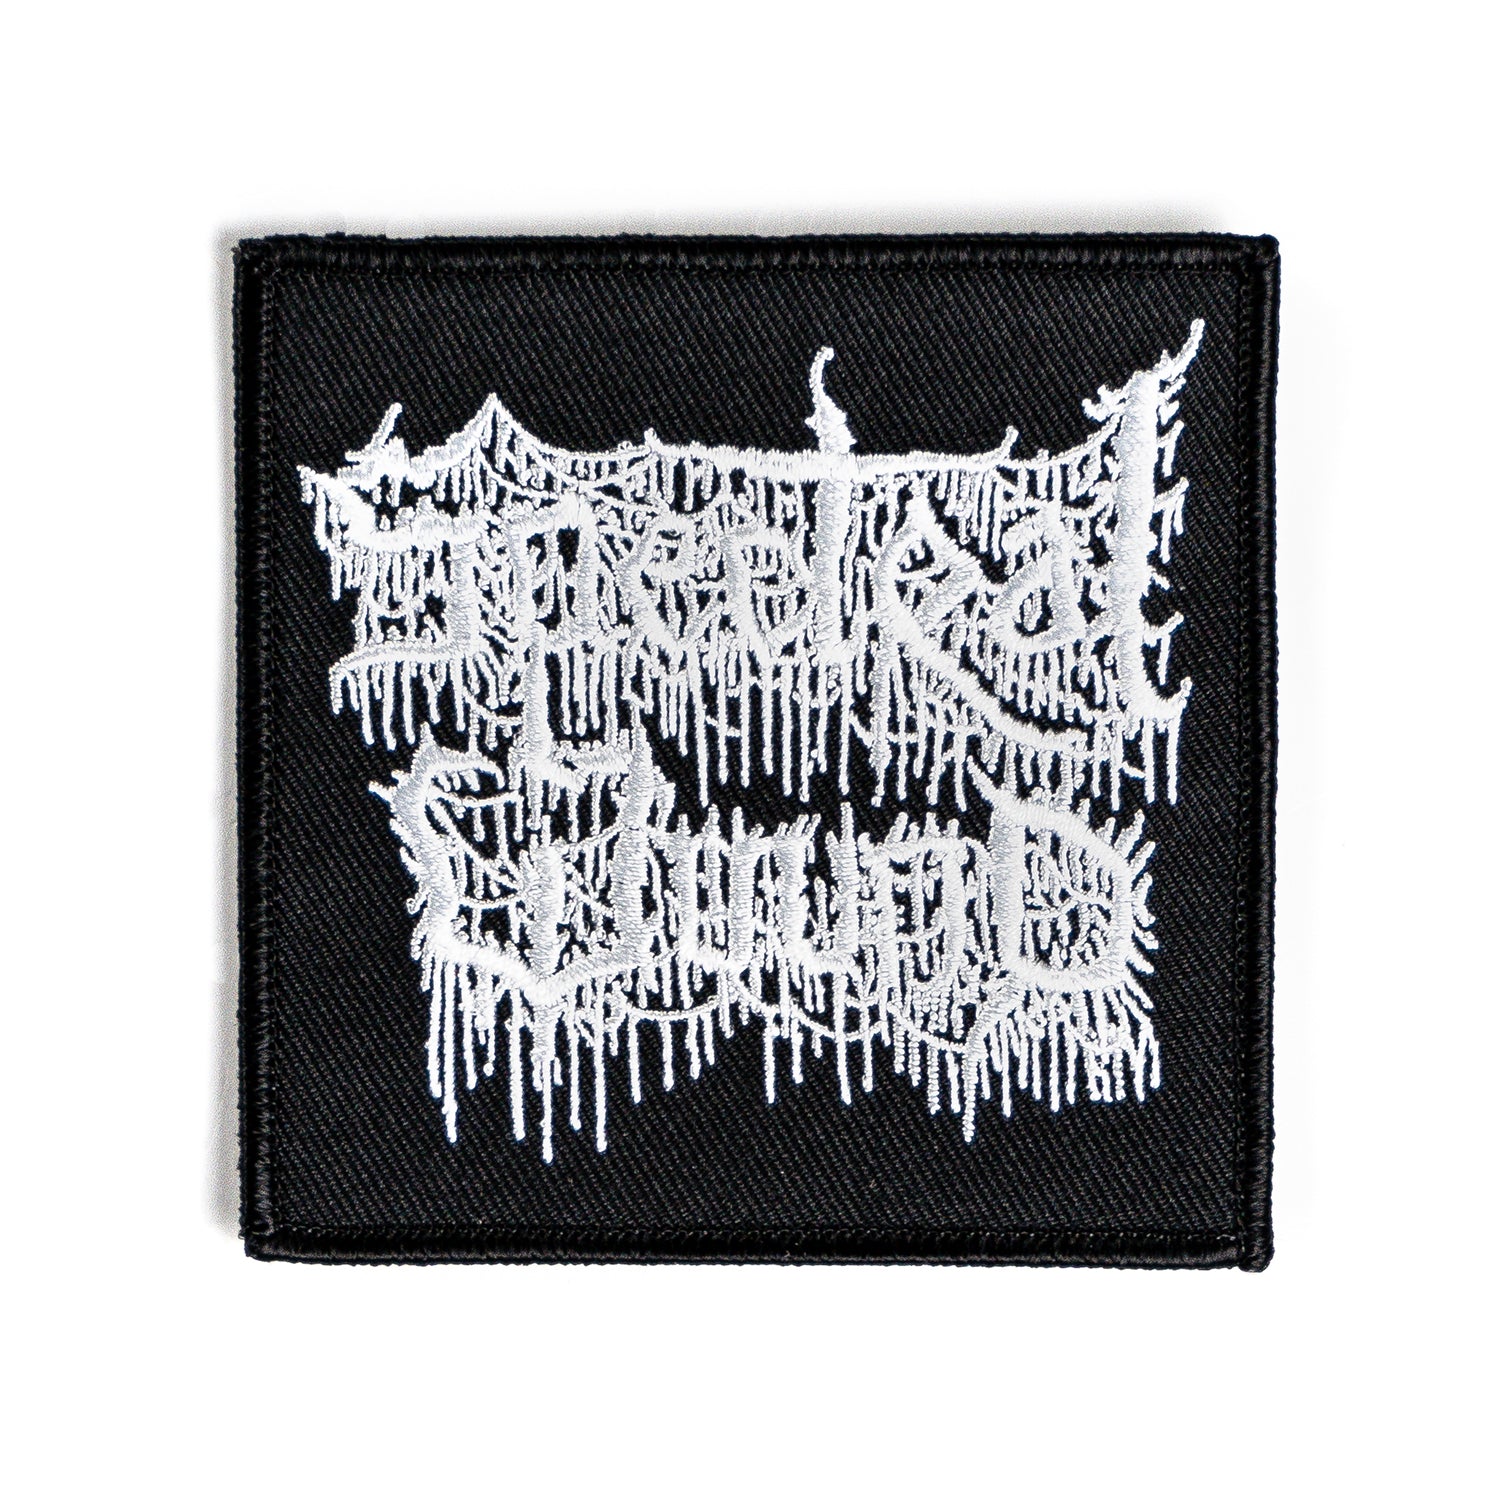 SPECTRAL WOUND "Logo" Patch